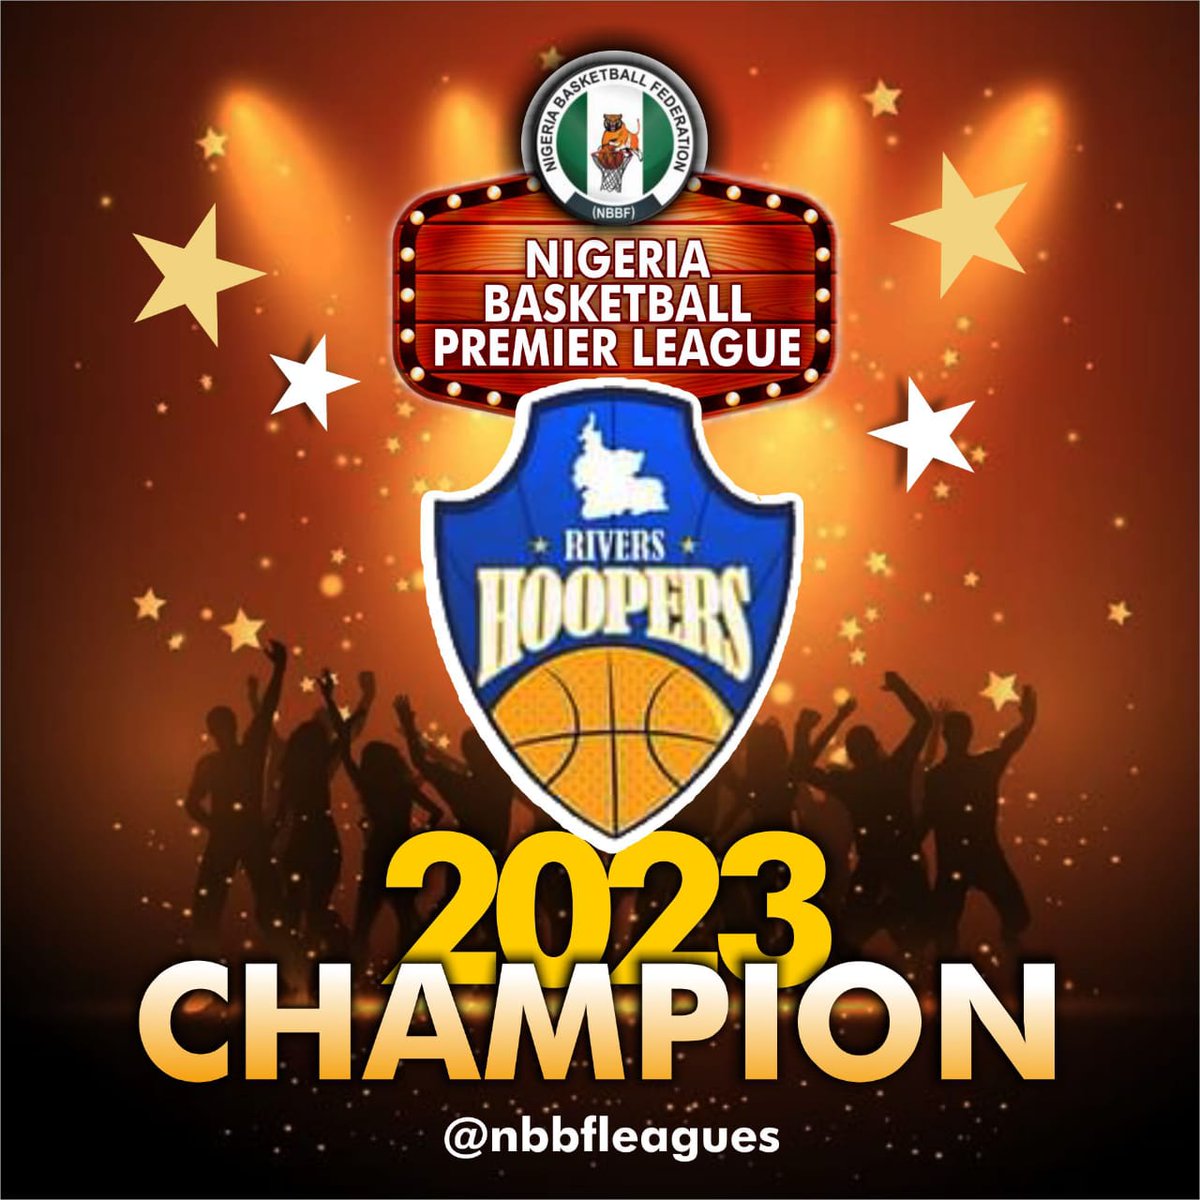 Congratulations Hoopers! @RiversHoopers Champions of the Men's Premier Basketball League. They have clinched the ticket to the #BAL @thebal proper